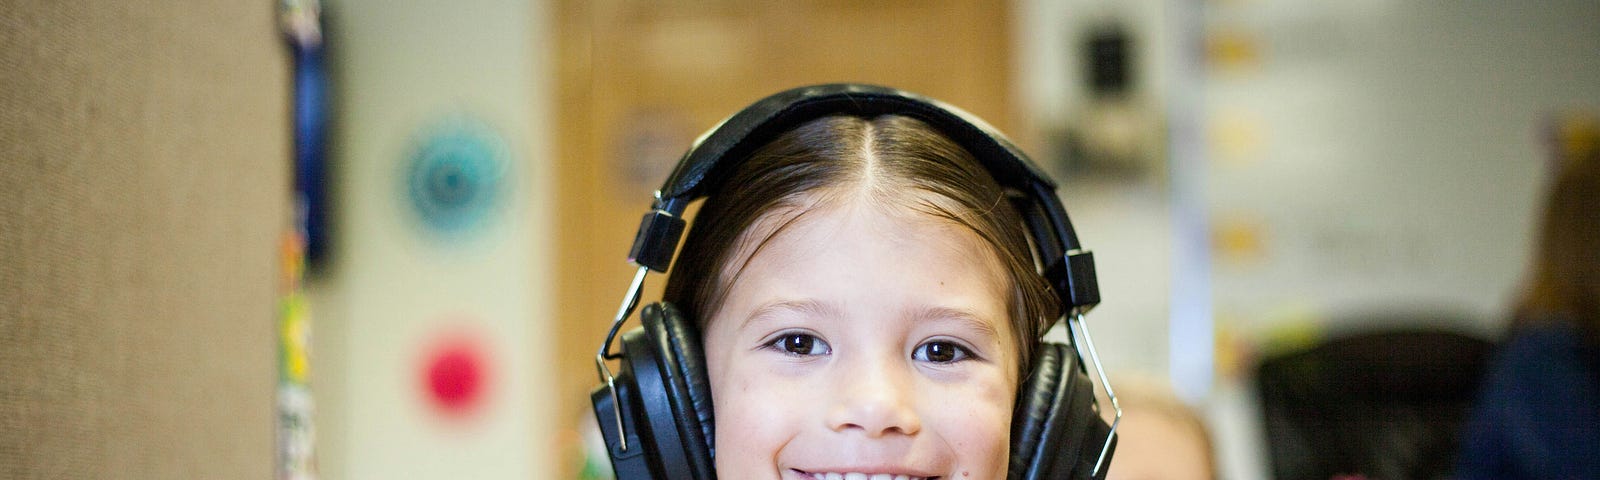 Image of a you g girl at school, wearing headphones